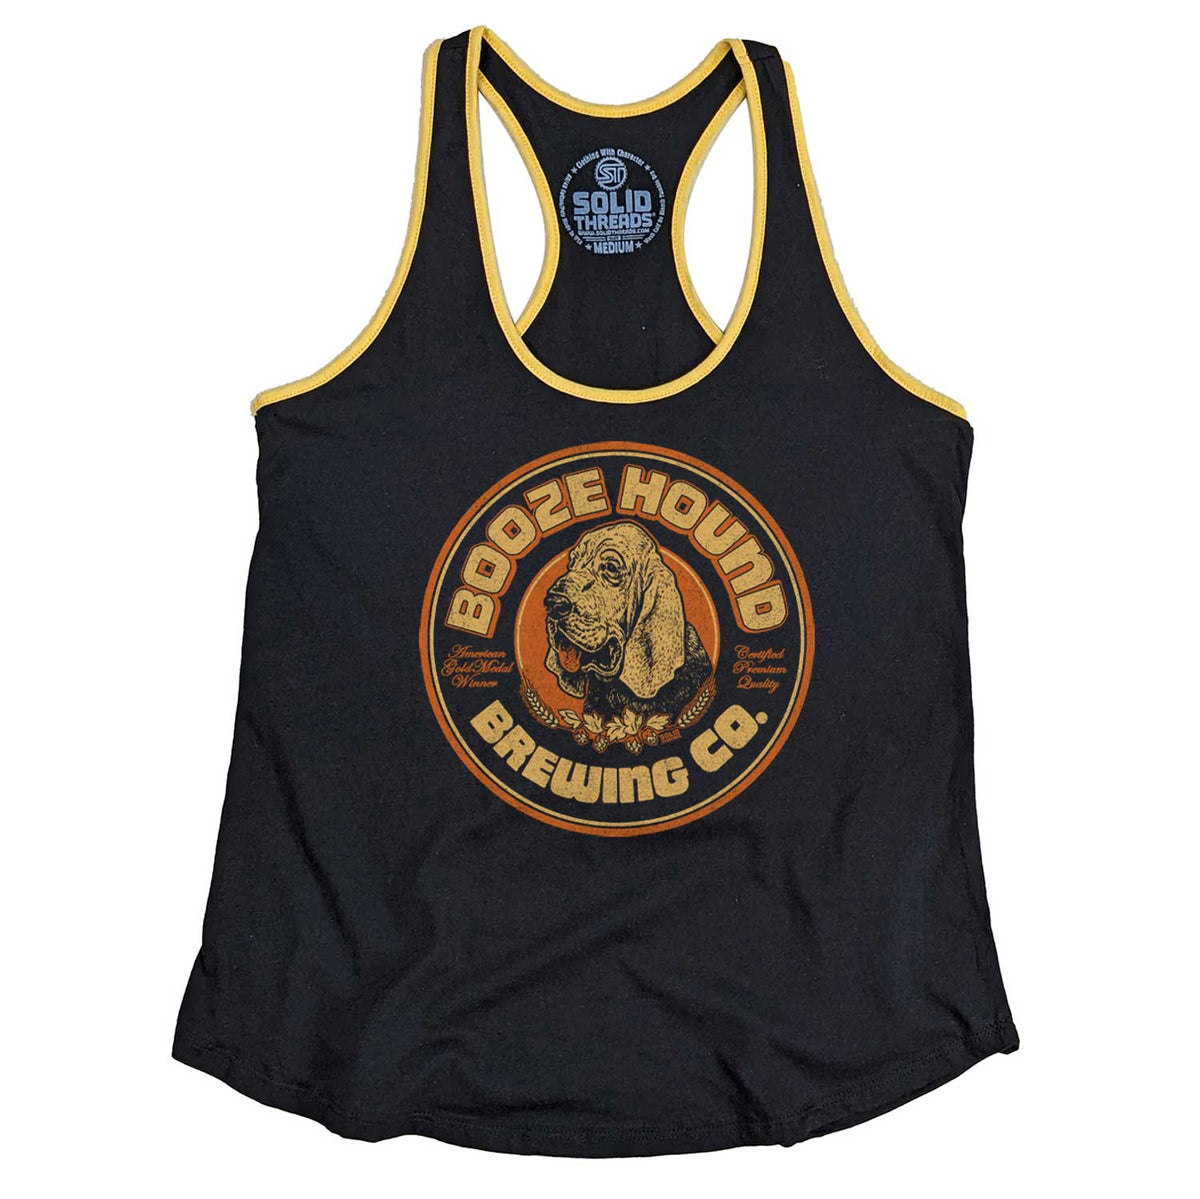 Women&#39;s Boozehound Brewing Co. Vintage Graphic Tank Top | Funny Drinking T-shirt | Solid Threads